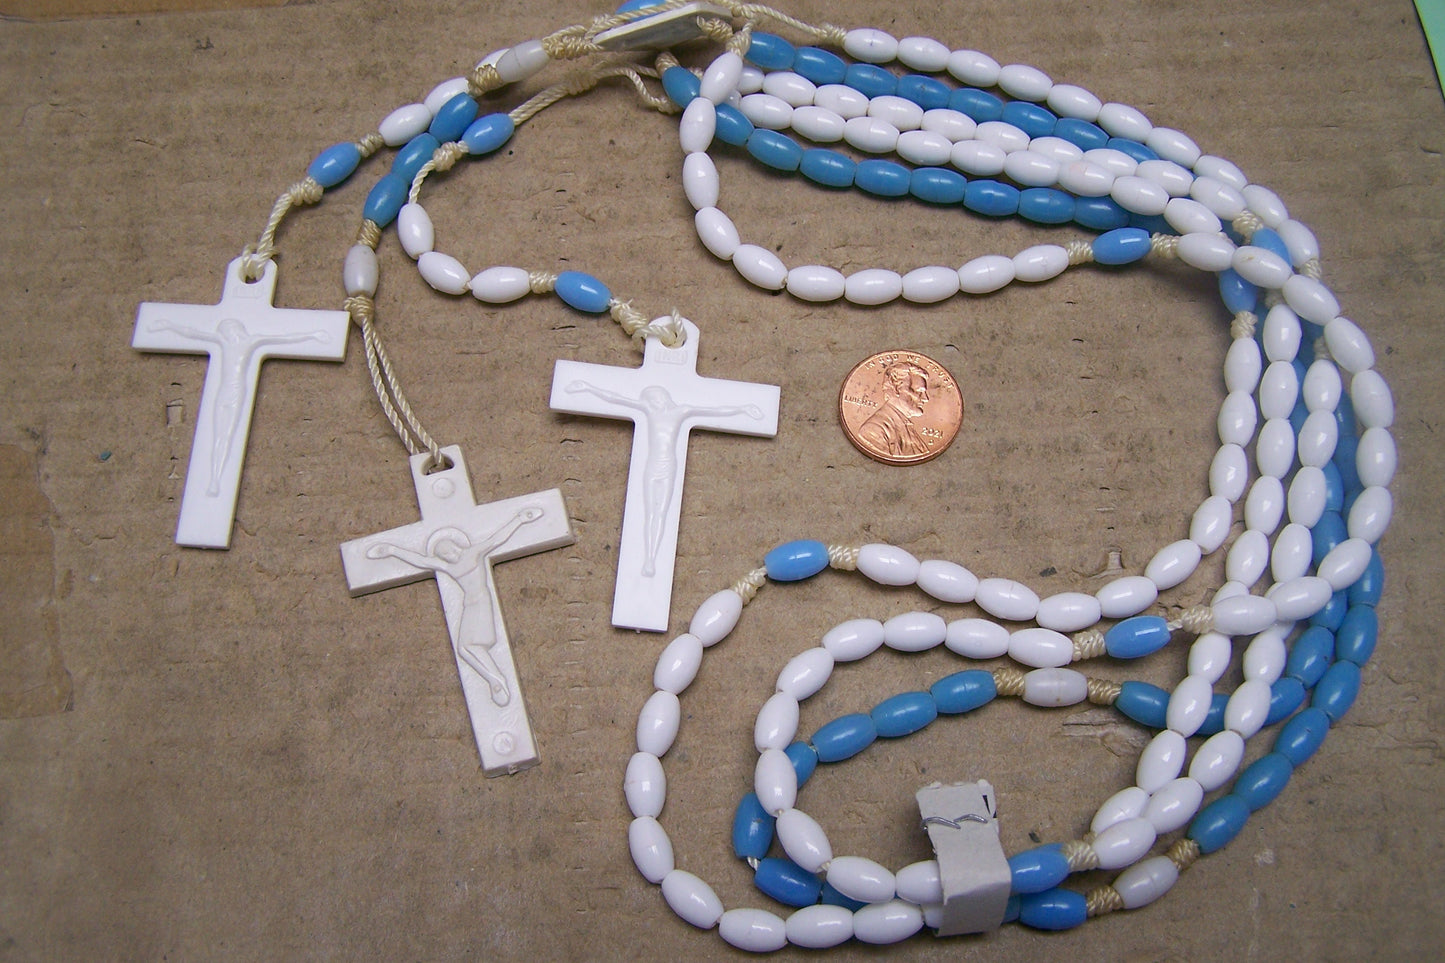 rosaries and rosary-making supplies, from Mexico